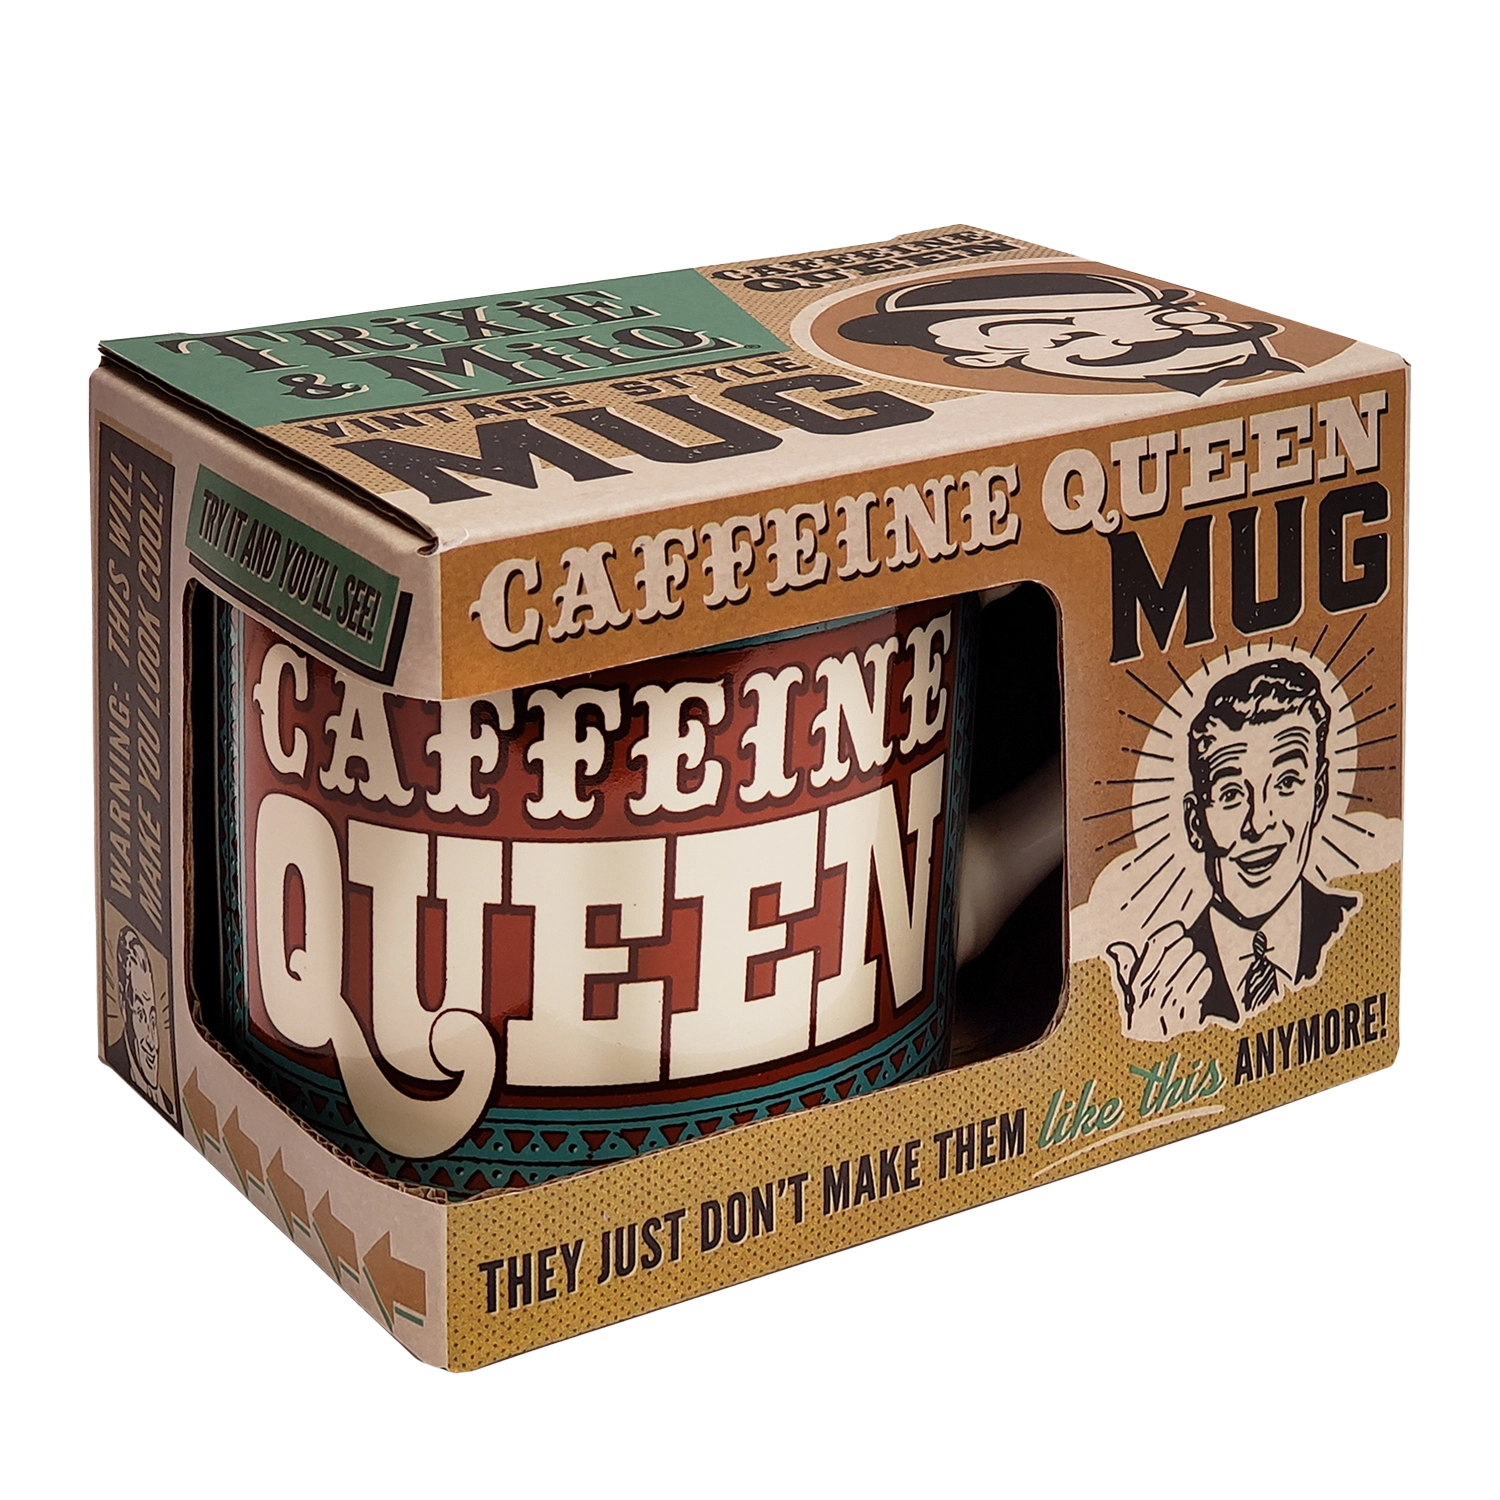 "Caffeine Queen" Ceramic tea and coffee mug Start everyday with confidence. Drinking glass, solid ceramic mug crafted for durability and aesthetic appeal. in Gift Box